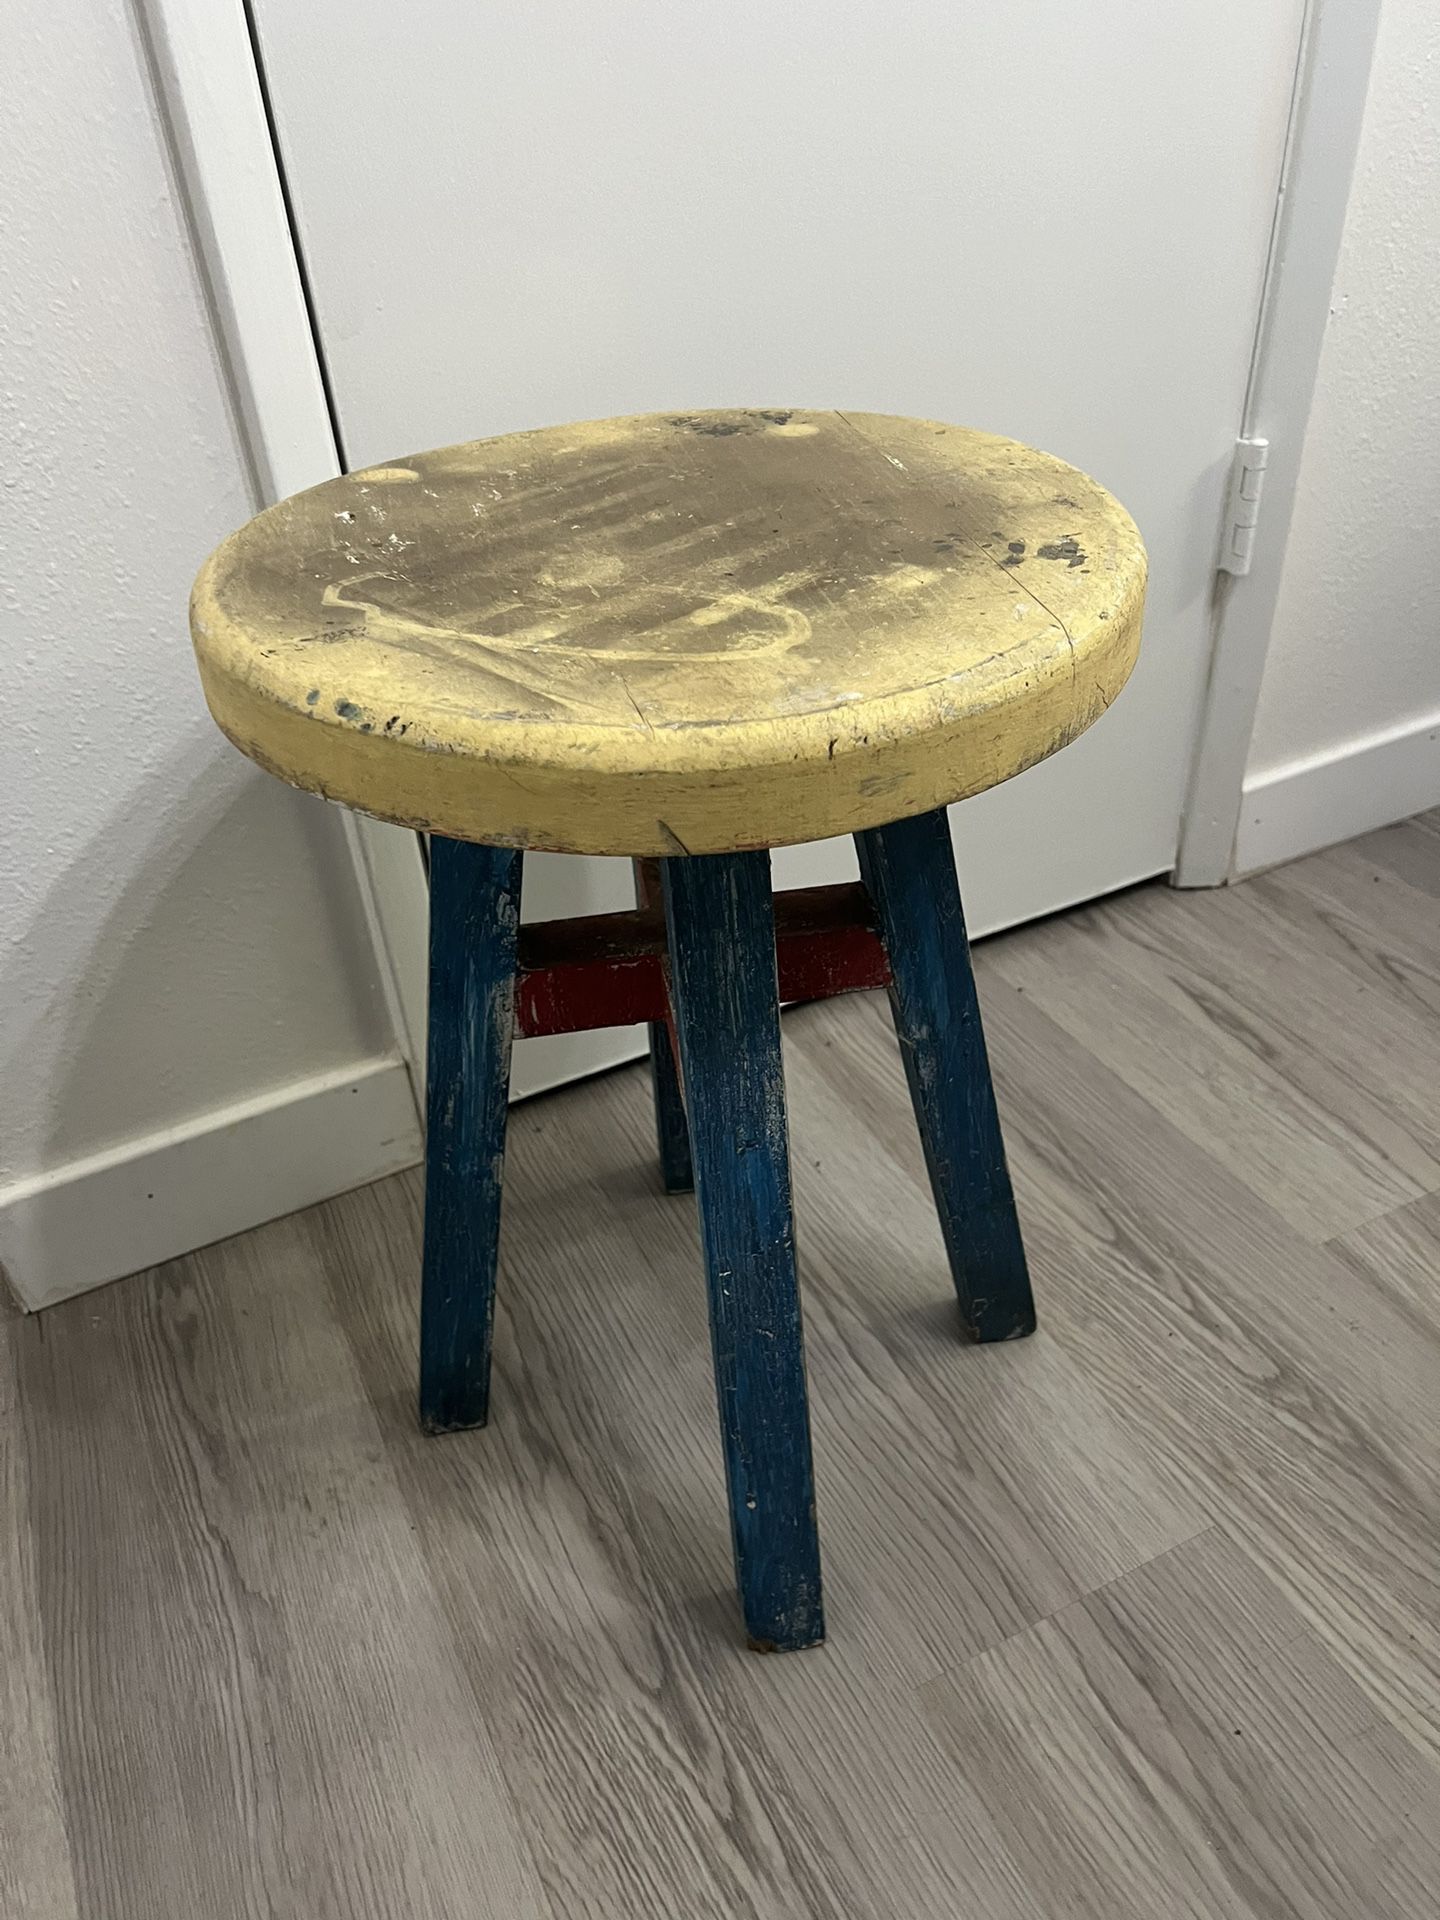 Wooden Round Stool Great For DIY Project 